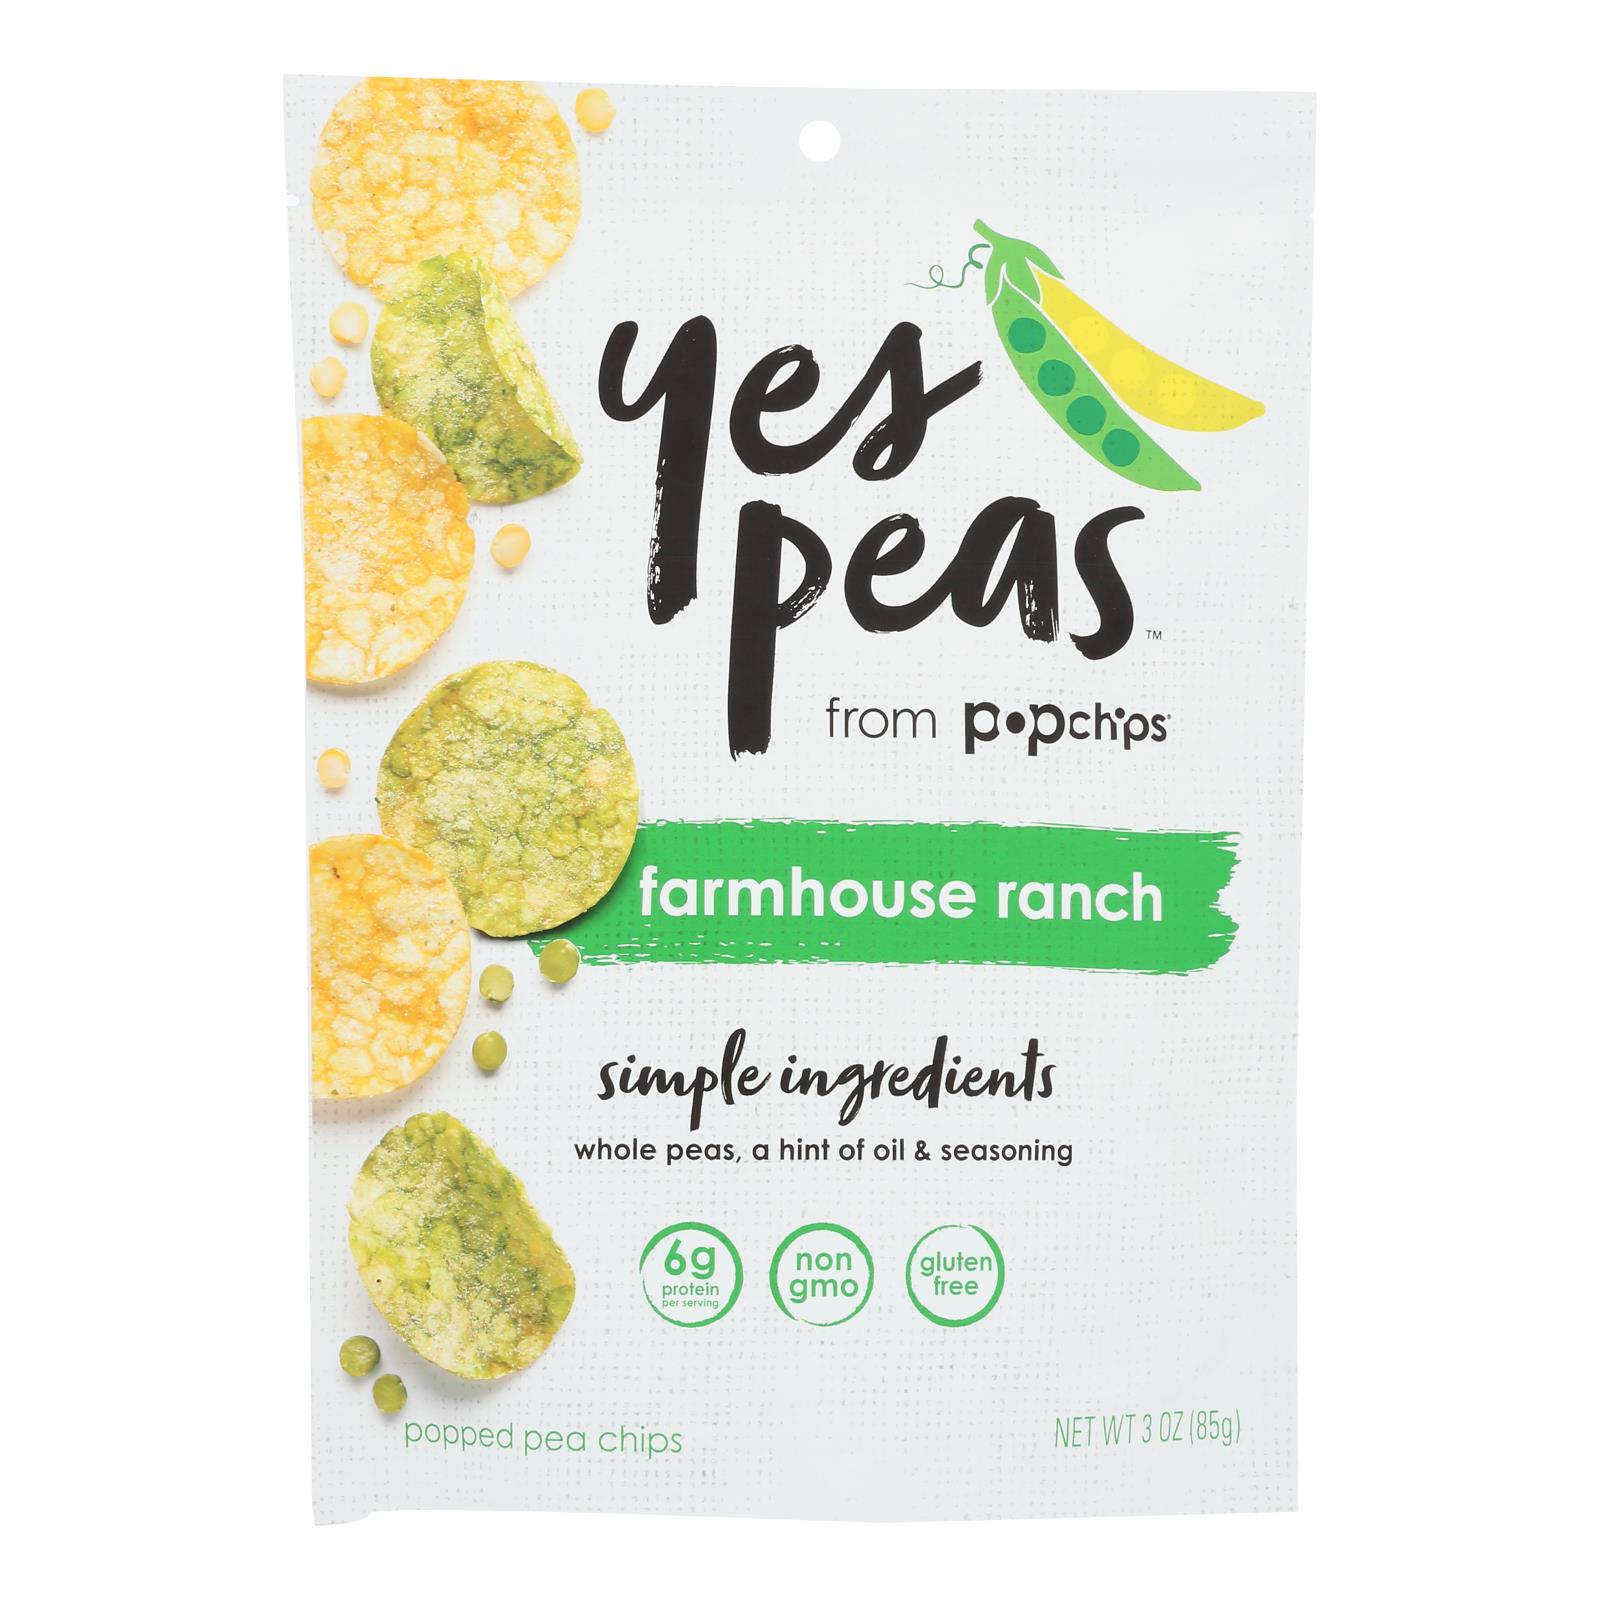 Yes Peas - Pop Pea Chip Farmhse Ranch - Case of 6 - 3 OZ